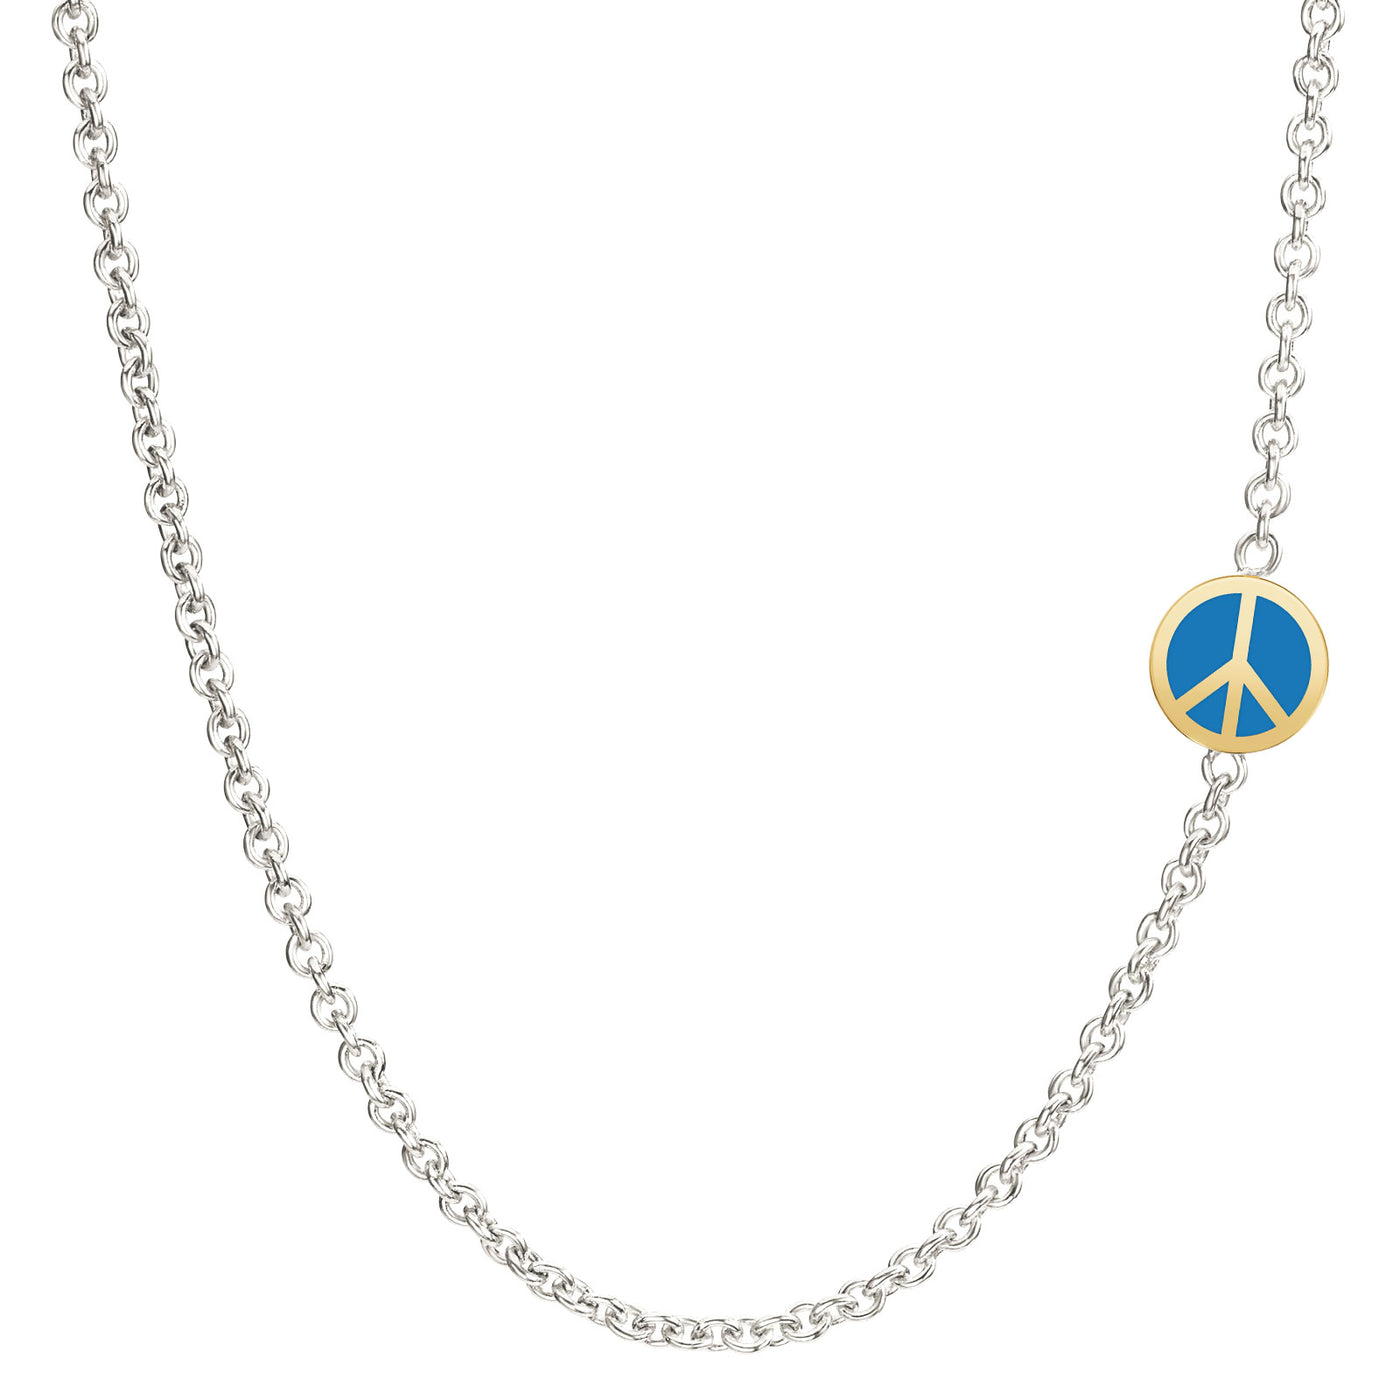 2mm Silver & Gold Enamel Peace Sign Chain